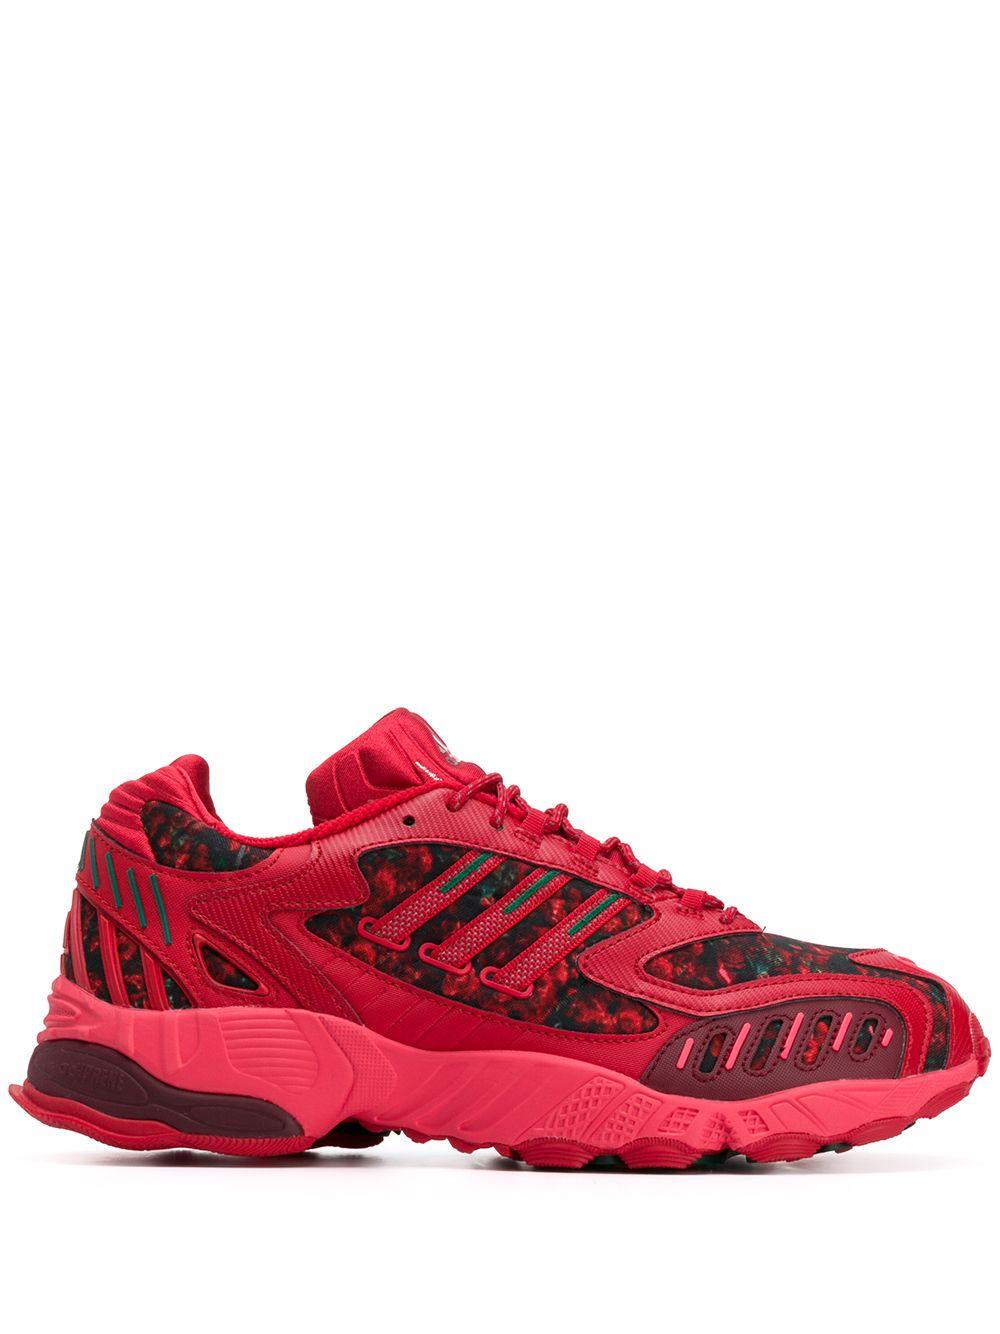 adidas Leather Torsion Trdc Sneakers in Scarlet & Burgundy (Red 